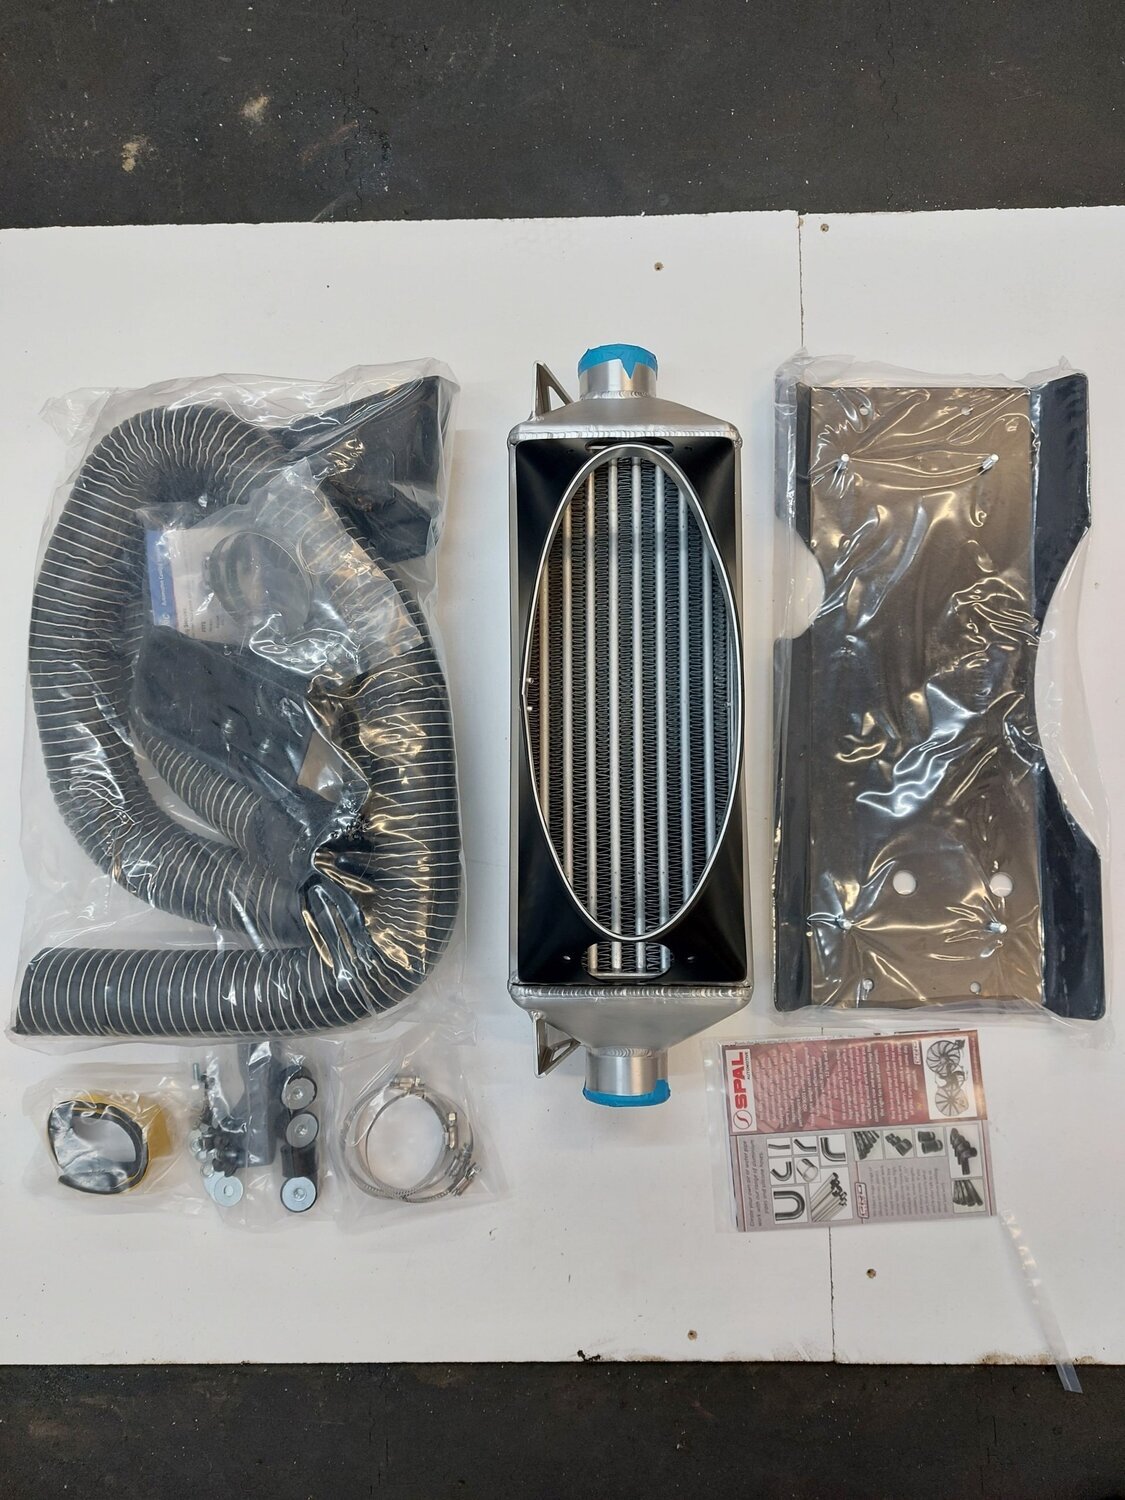 Lotus exige pro alloy intercooler kit with airfeed kit